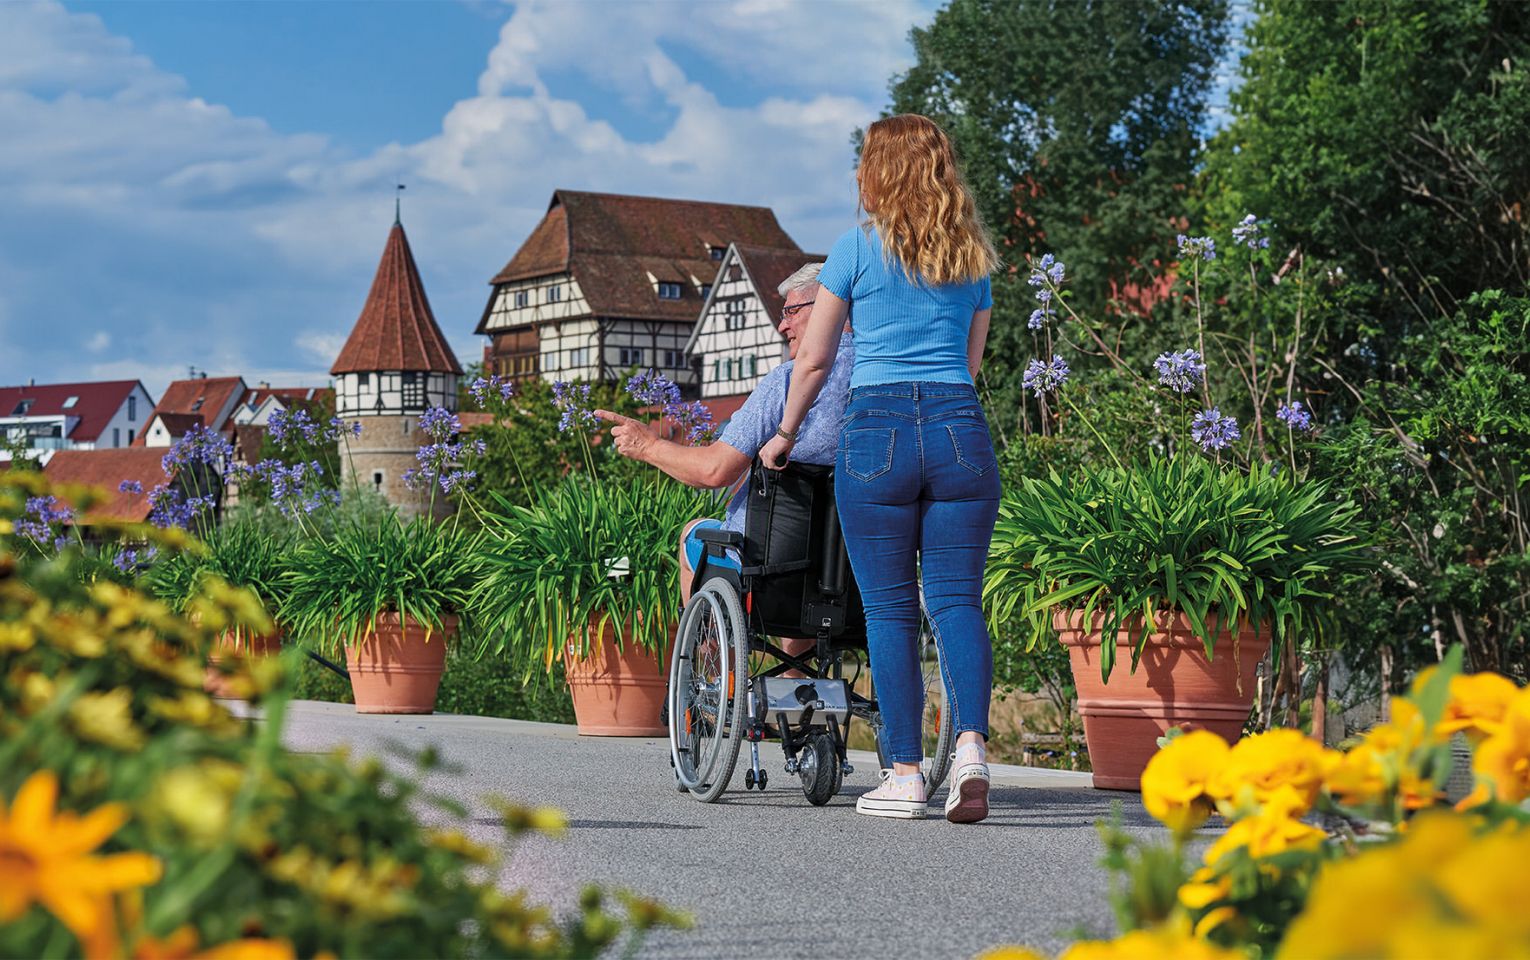 The picture shows a younger woman pushing an older man in a wheelchair through a thriving city. A castle can be seen in the background. There is an AAT push aid on the wheelchair to help the woman push the wheelchair. 